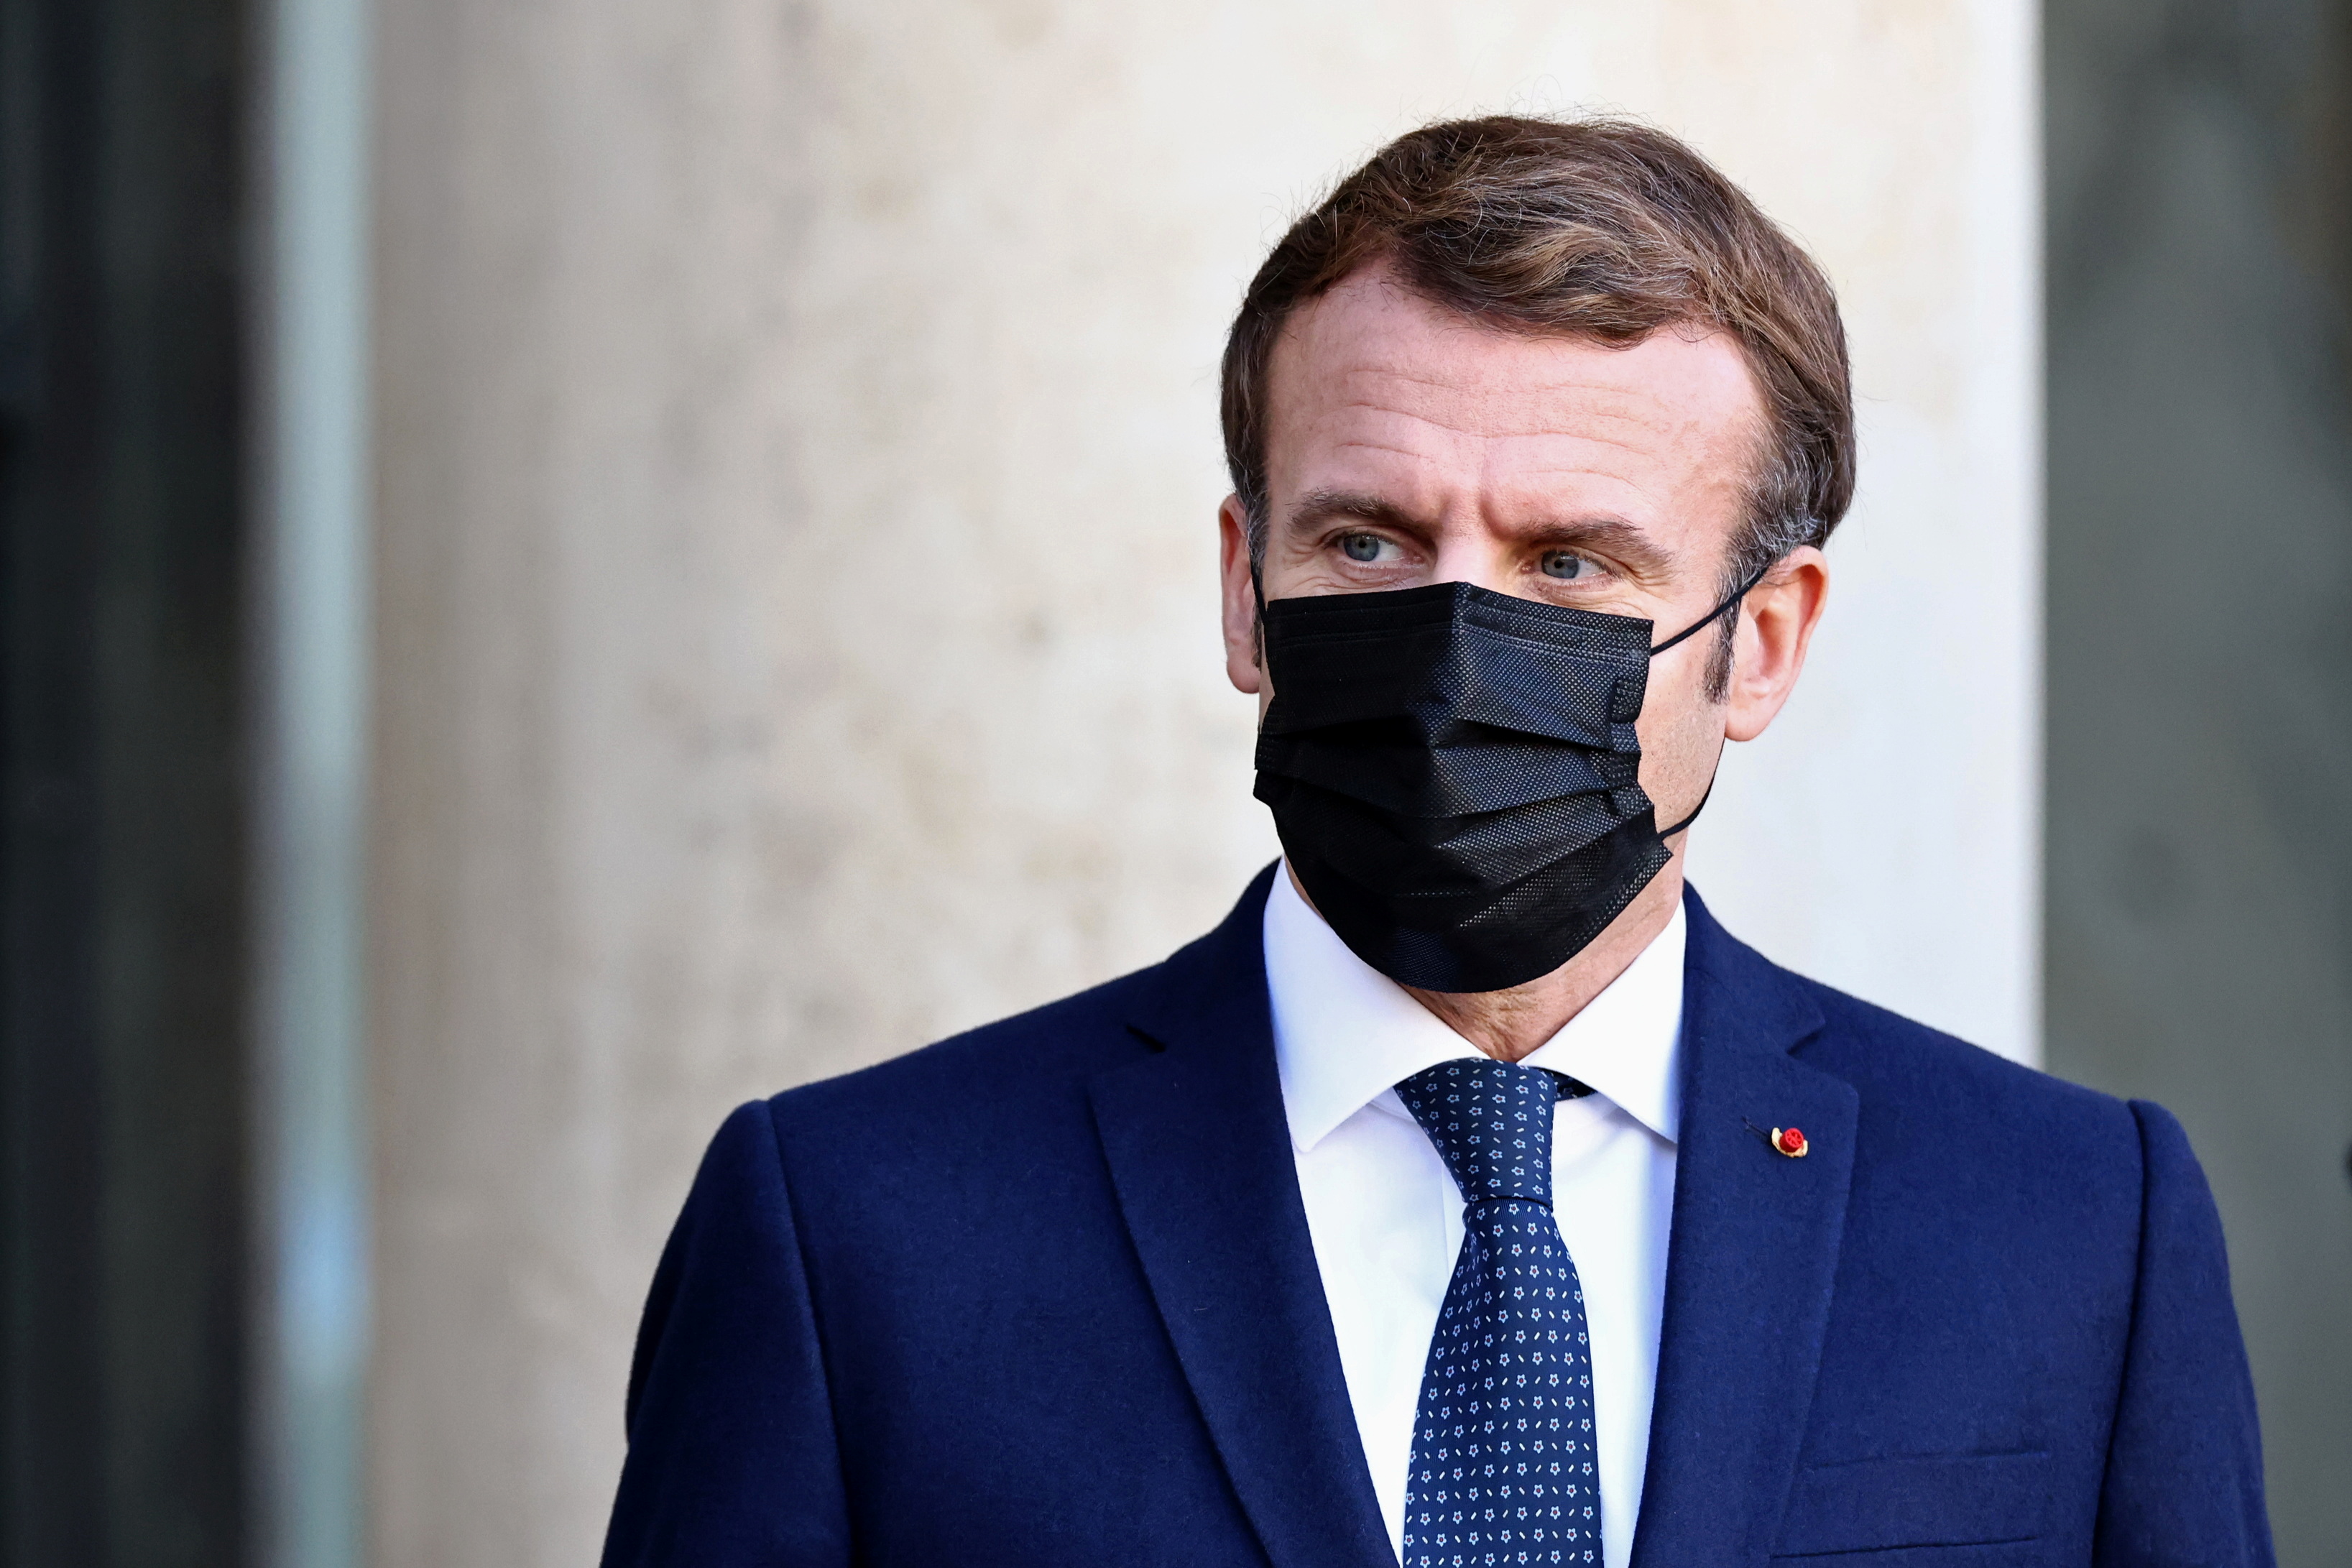 French President Emmanuel Macron, wearing a protective face mask, waits for a guest at the Elysee Palace in Paris, France, December 1, 2021. REUTERS/Sarah Meyssonnier